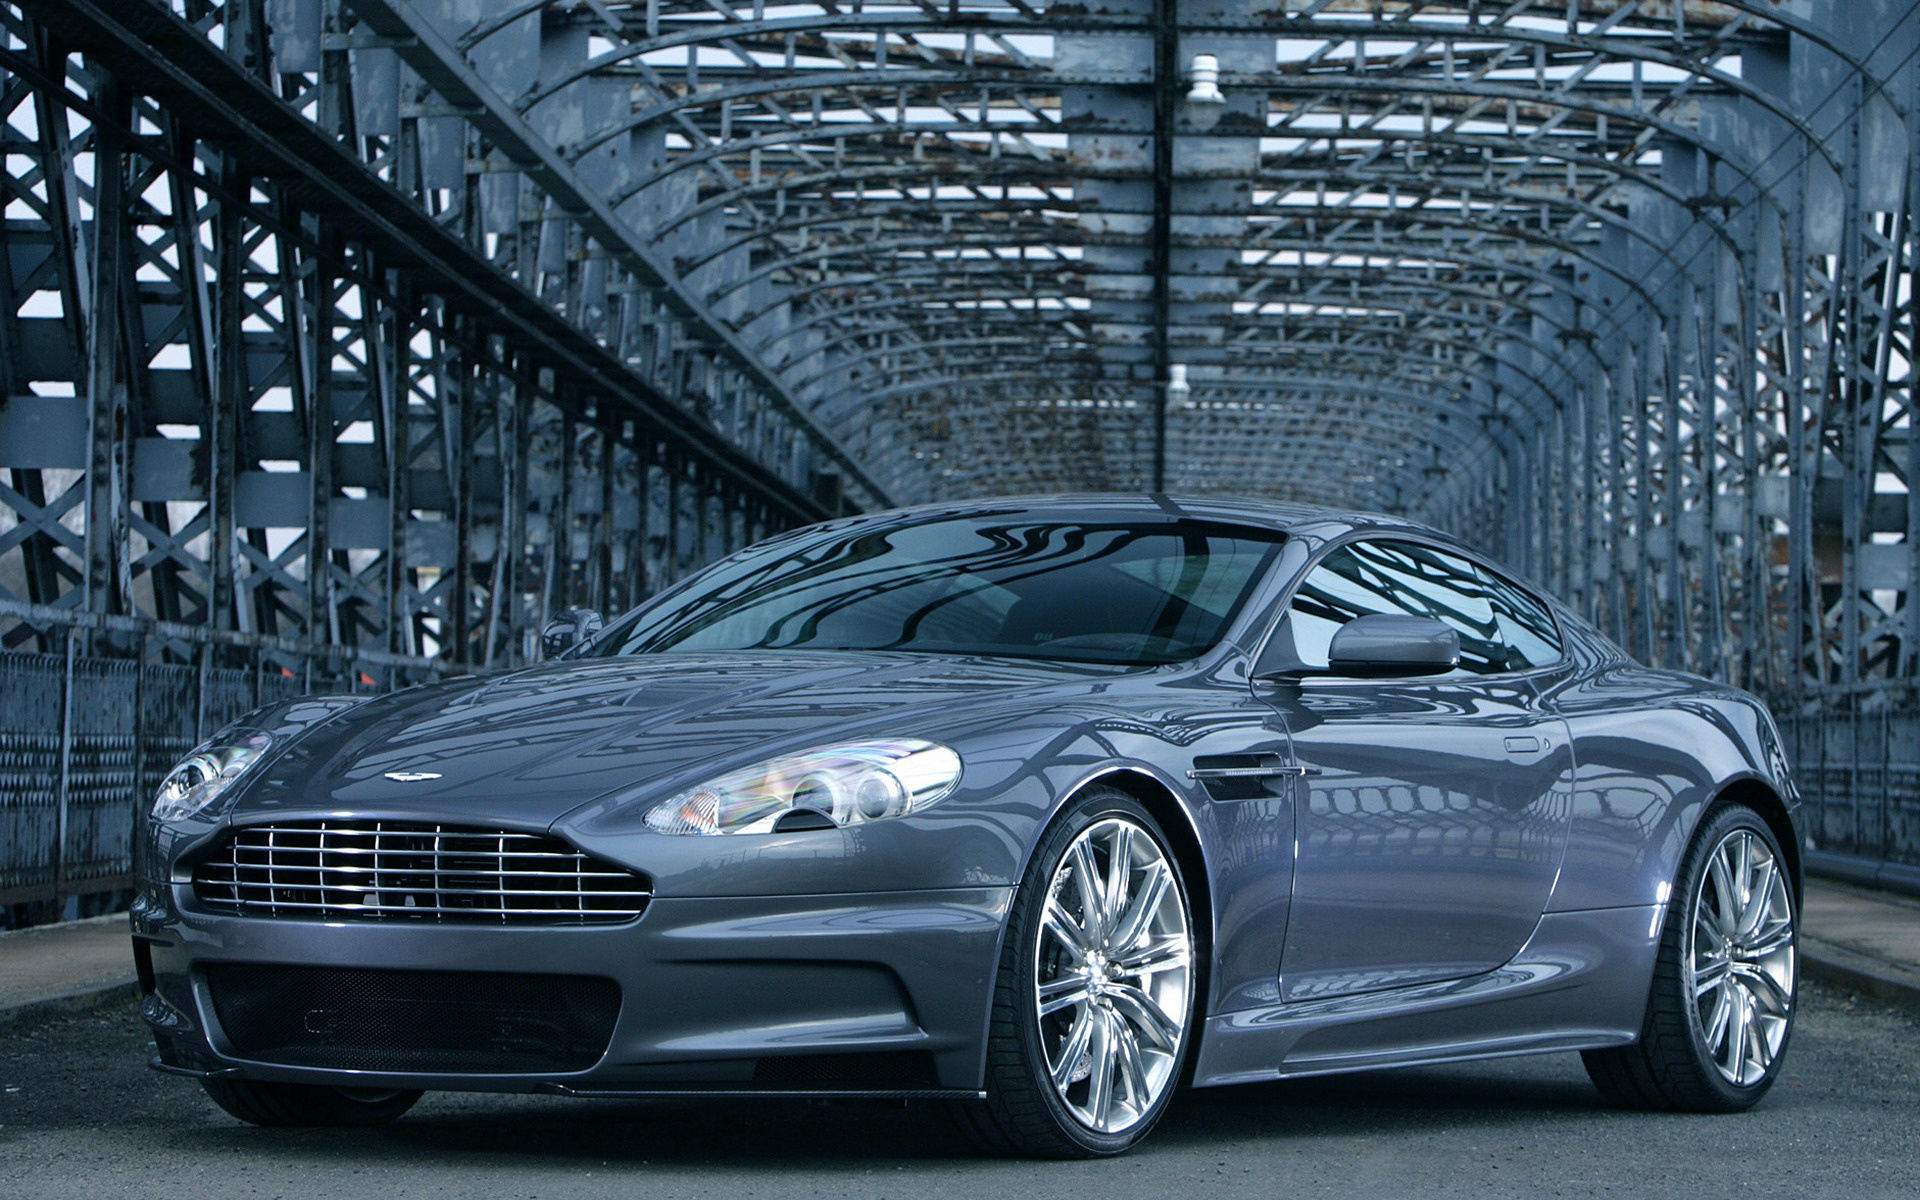 2006 Aston Martin DBS 007 Casino Royale - Wallpapers and HD Images